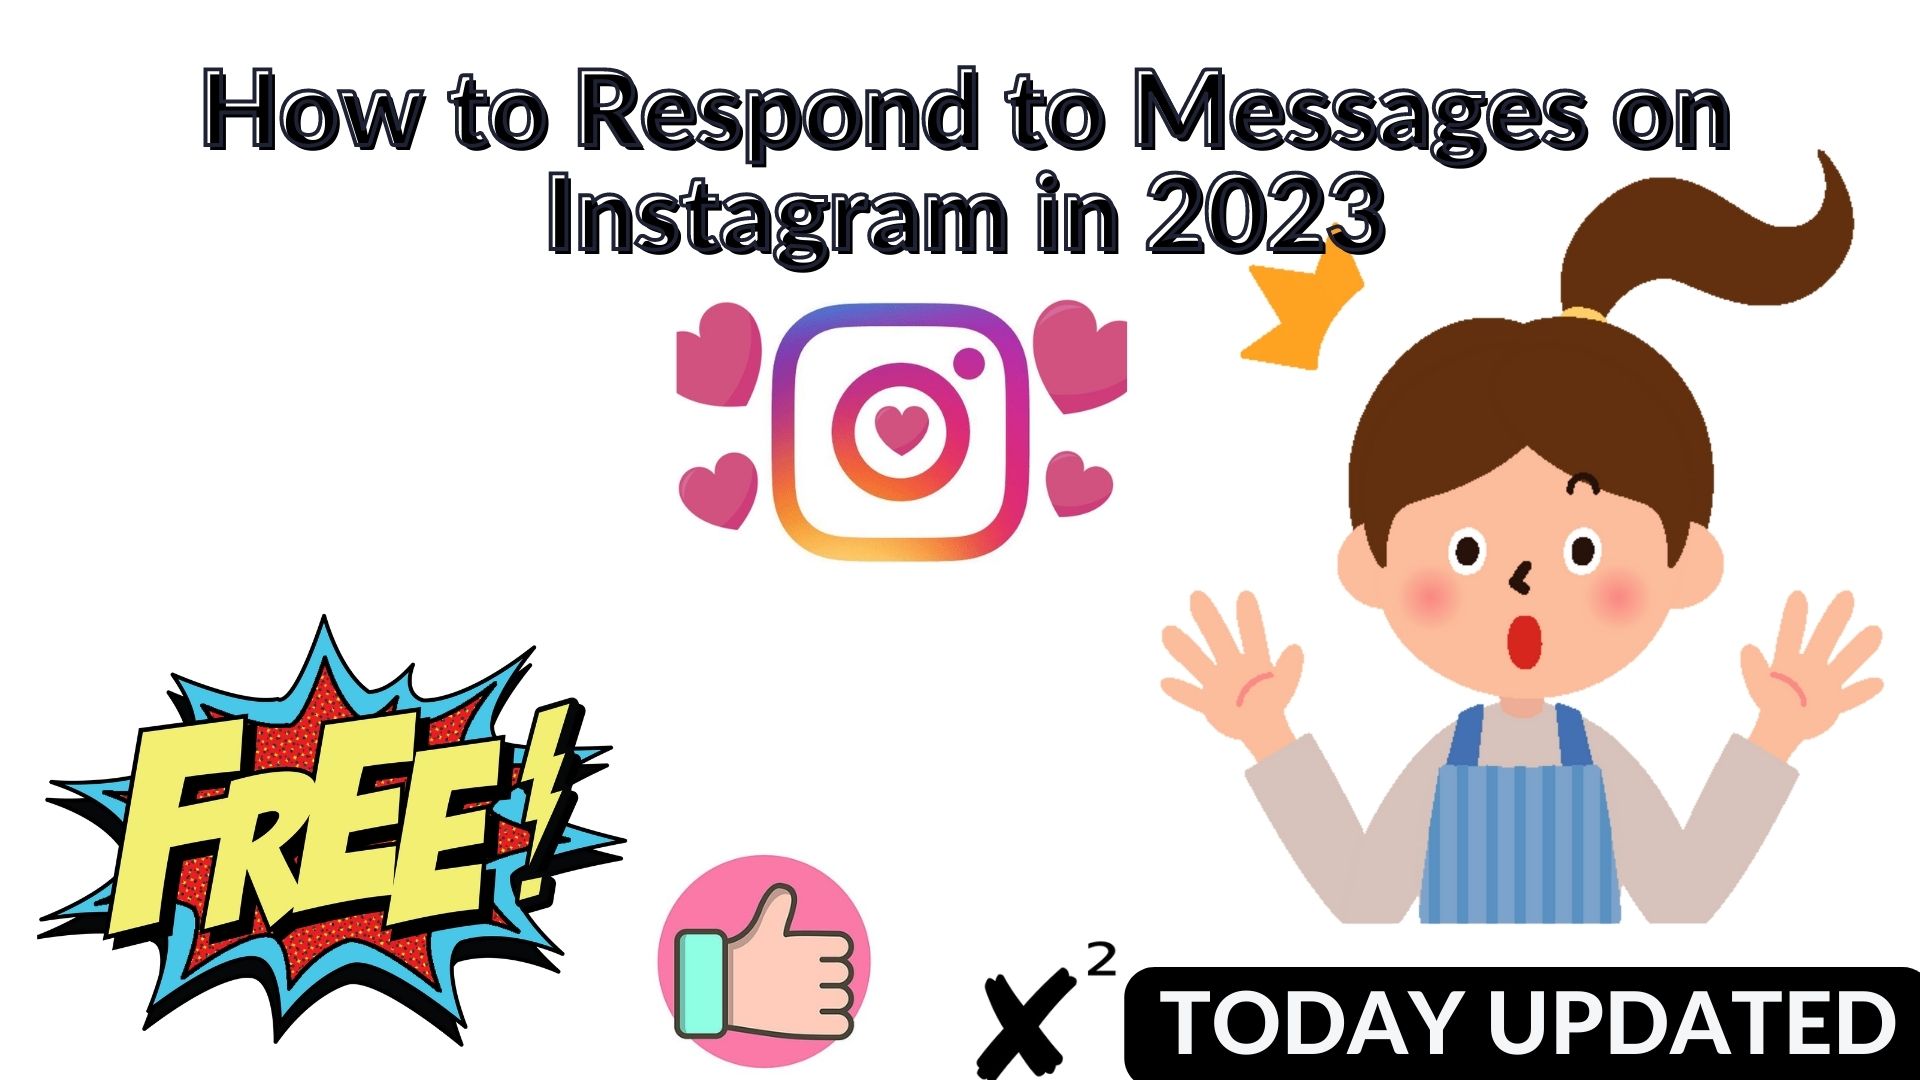 How to Respond to Messages on Instagram in 2023